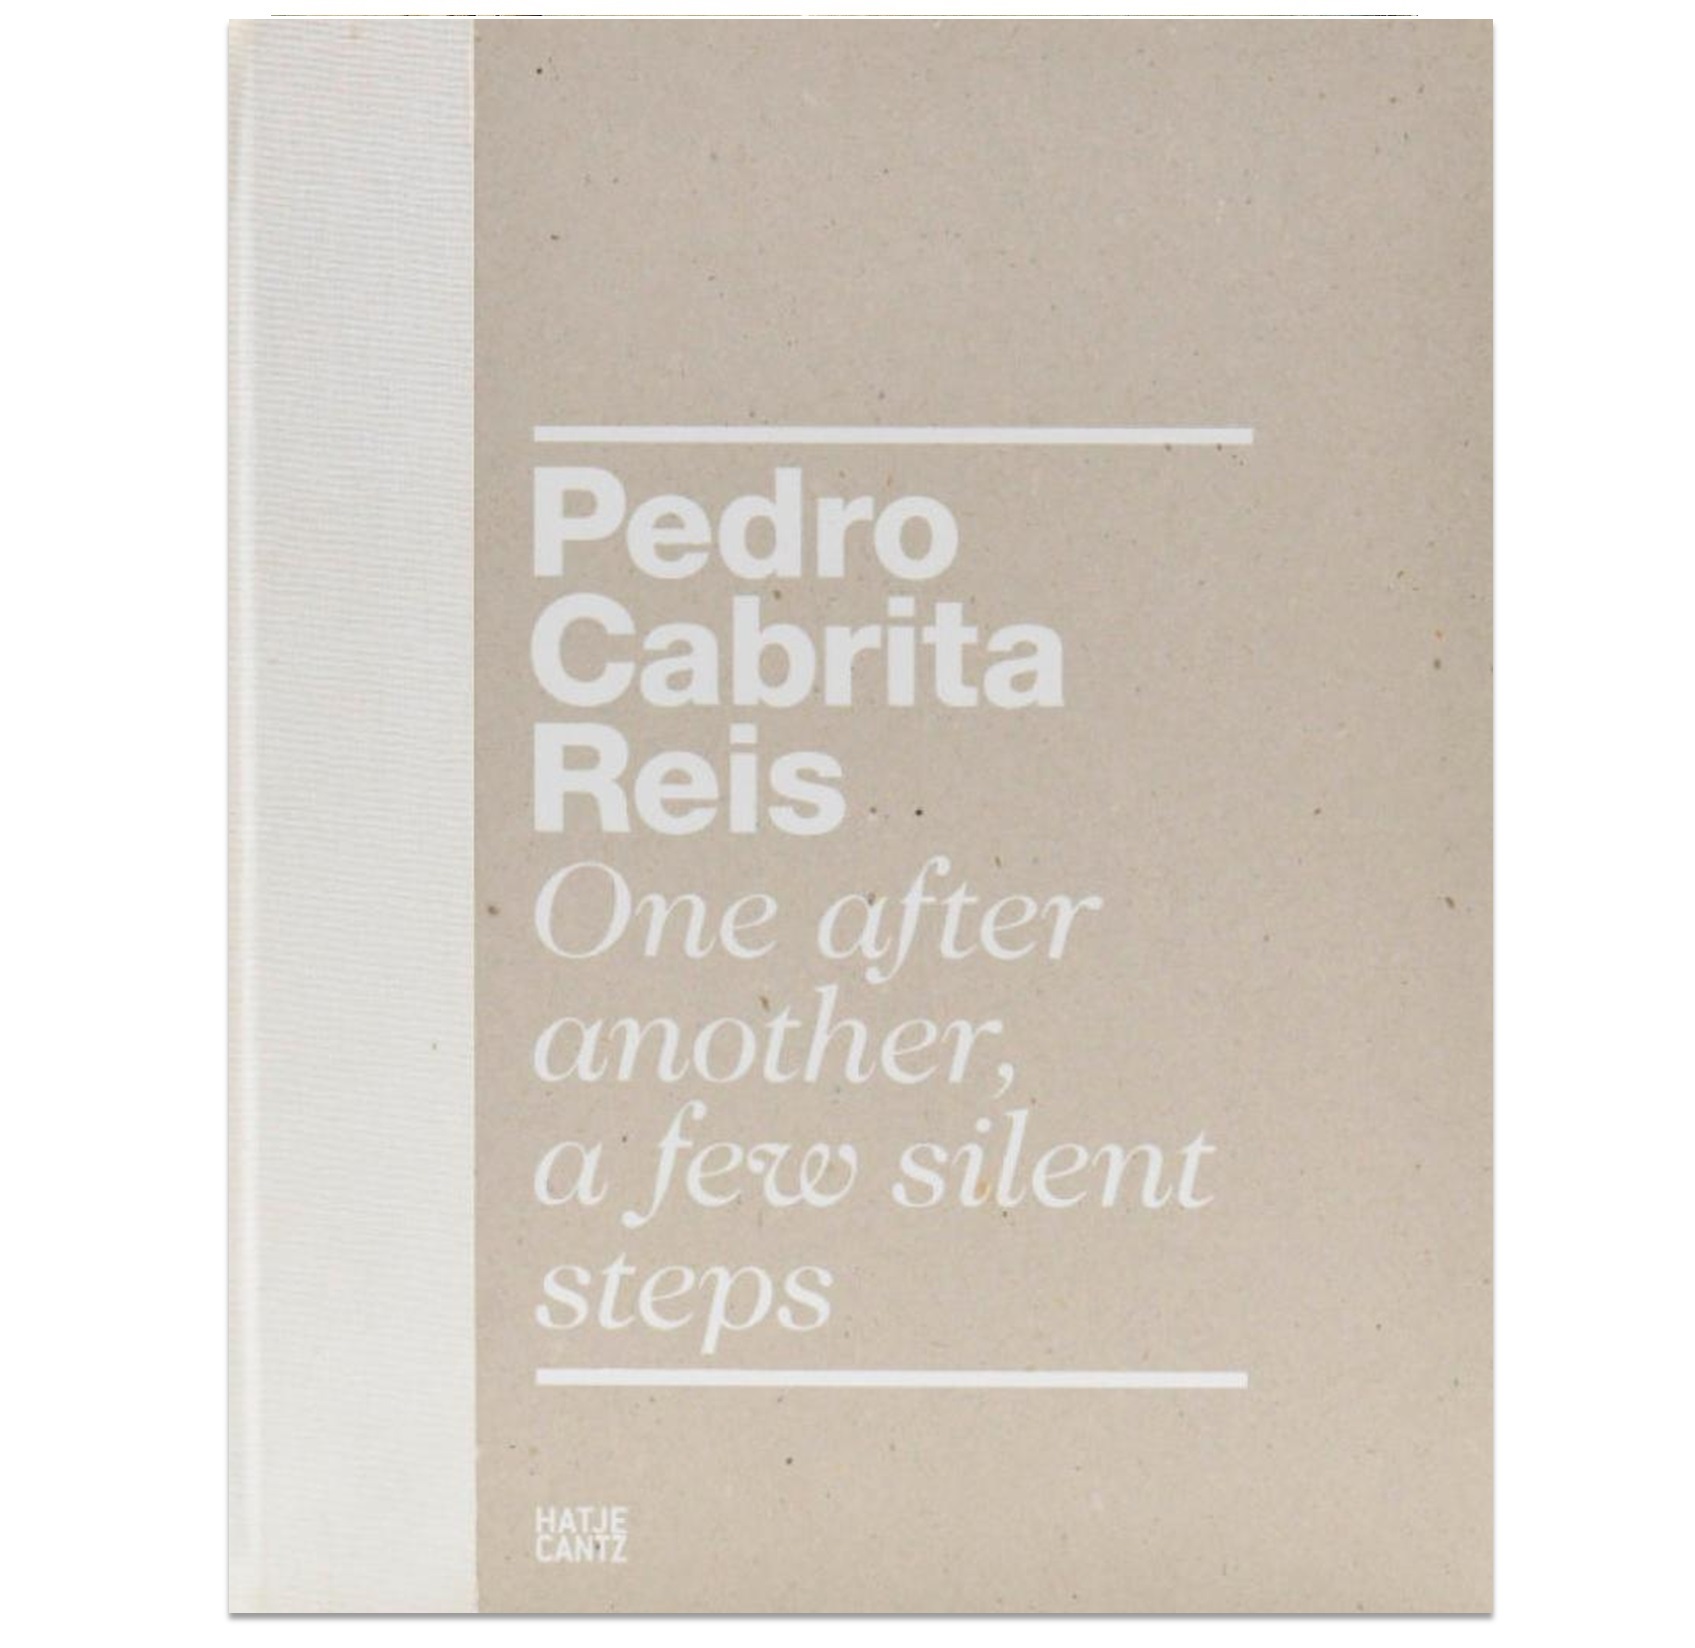 PEDRO CABRITA REIS: ONE AFTER ANOTHER A FEW SILENT STEPS